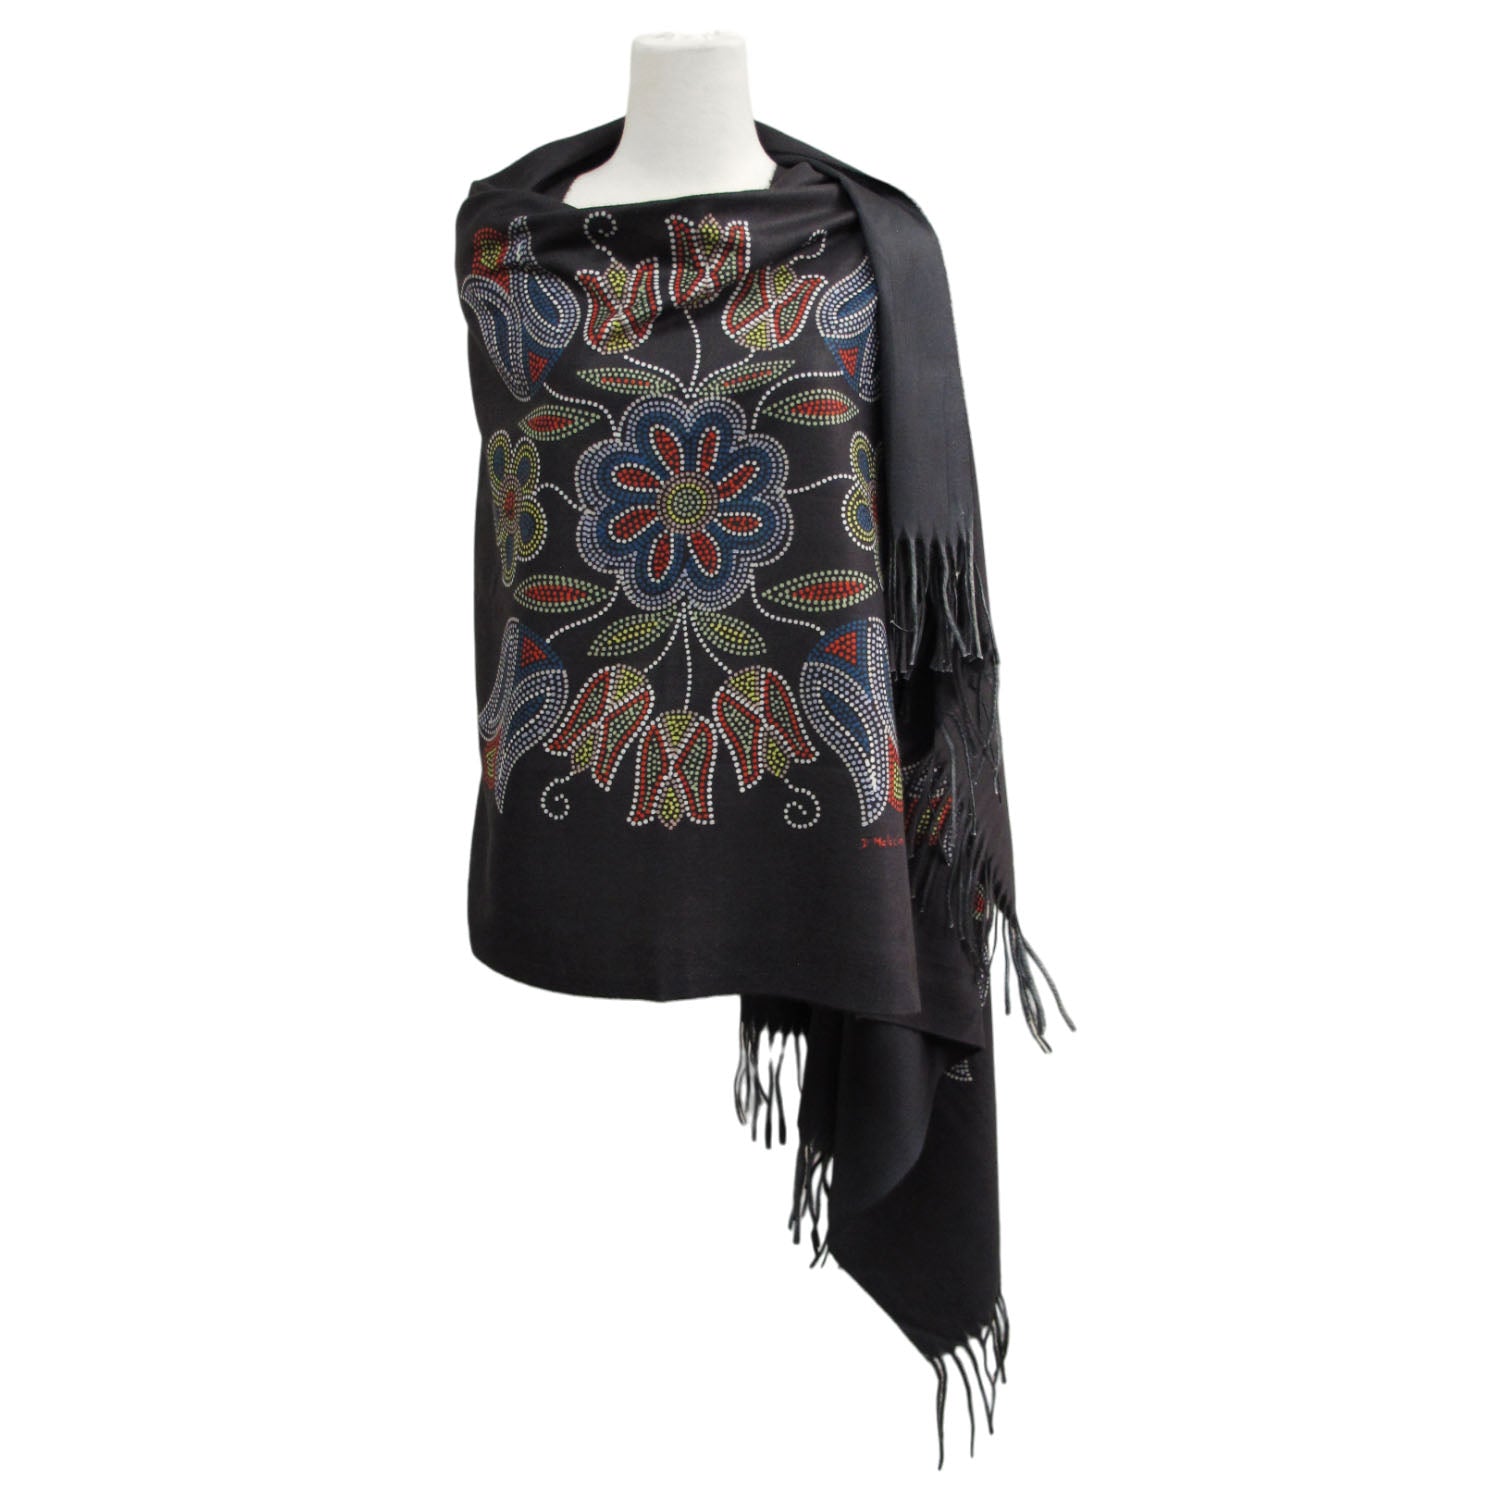 Deb Malcolm Silver Threads Eco-Shawl - Out of Stock